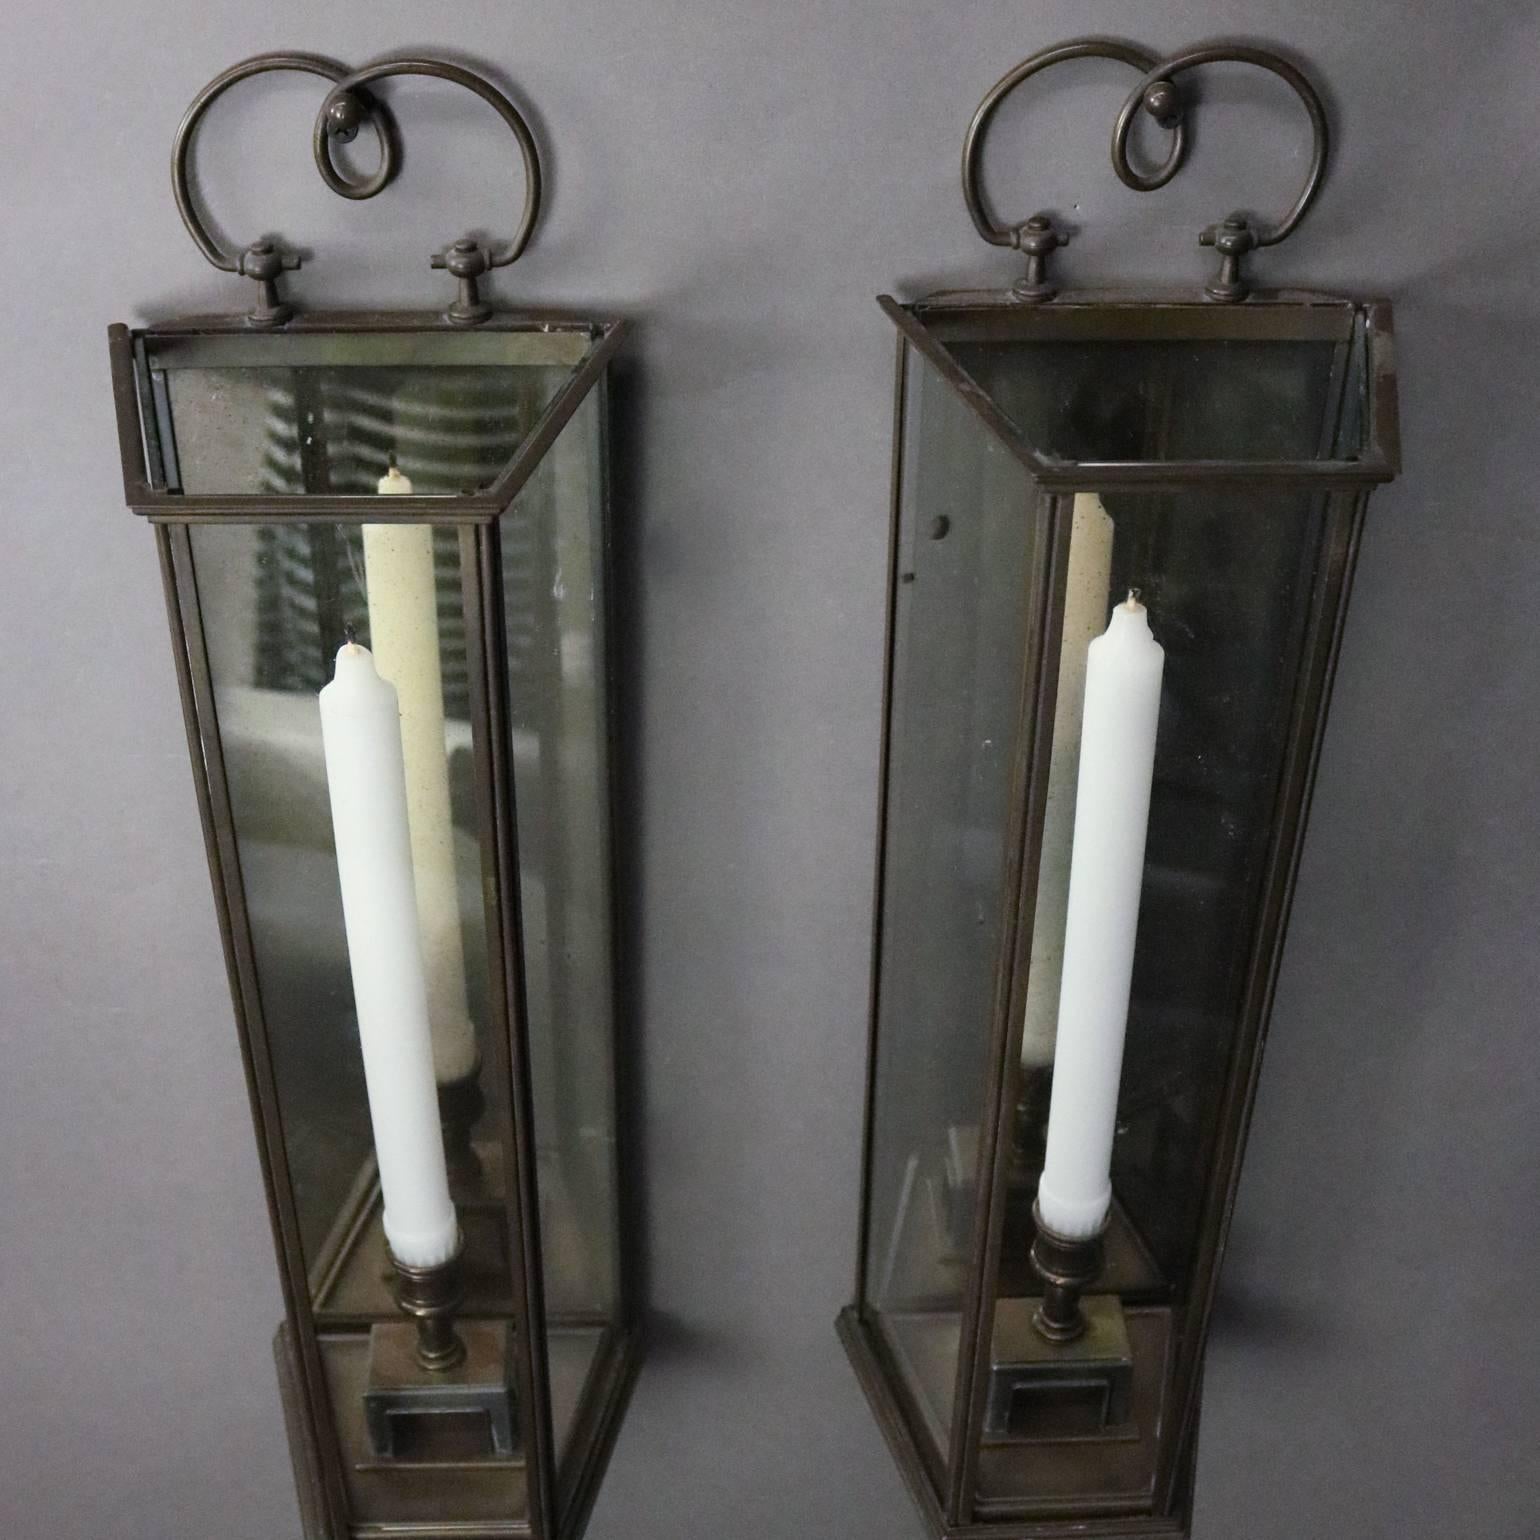 Pair of vintage Colonial Williamsburg bronze and glass cased mirror back candle wall sconces, 20th century

Measures: 20" H x 6" W x 5" D.